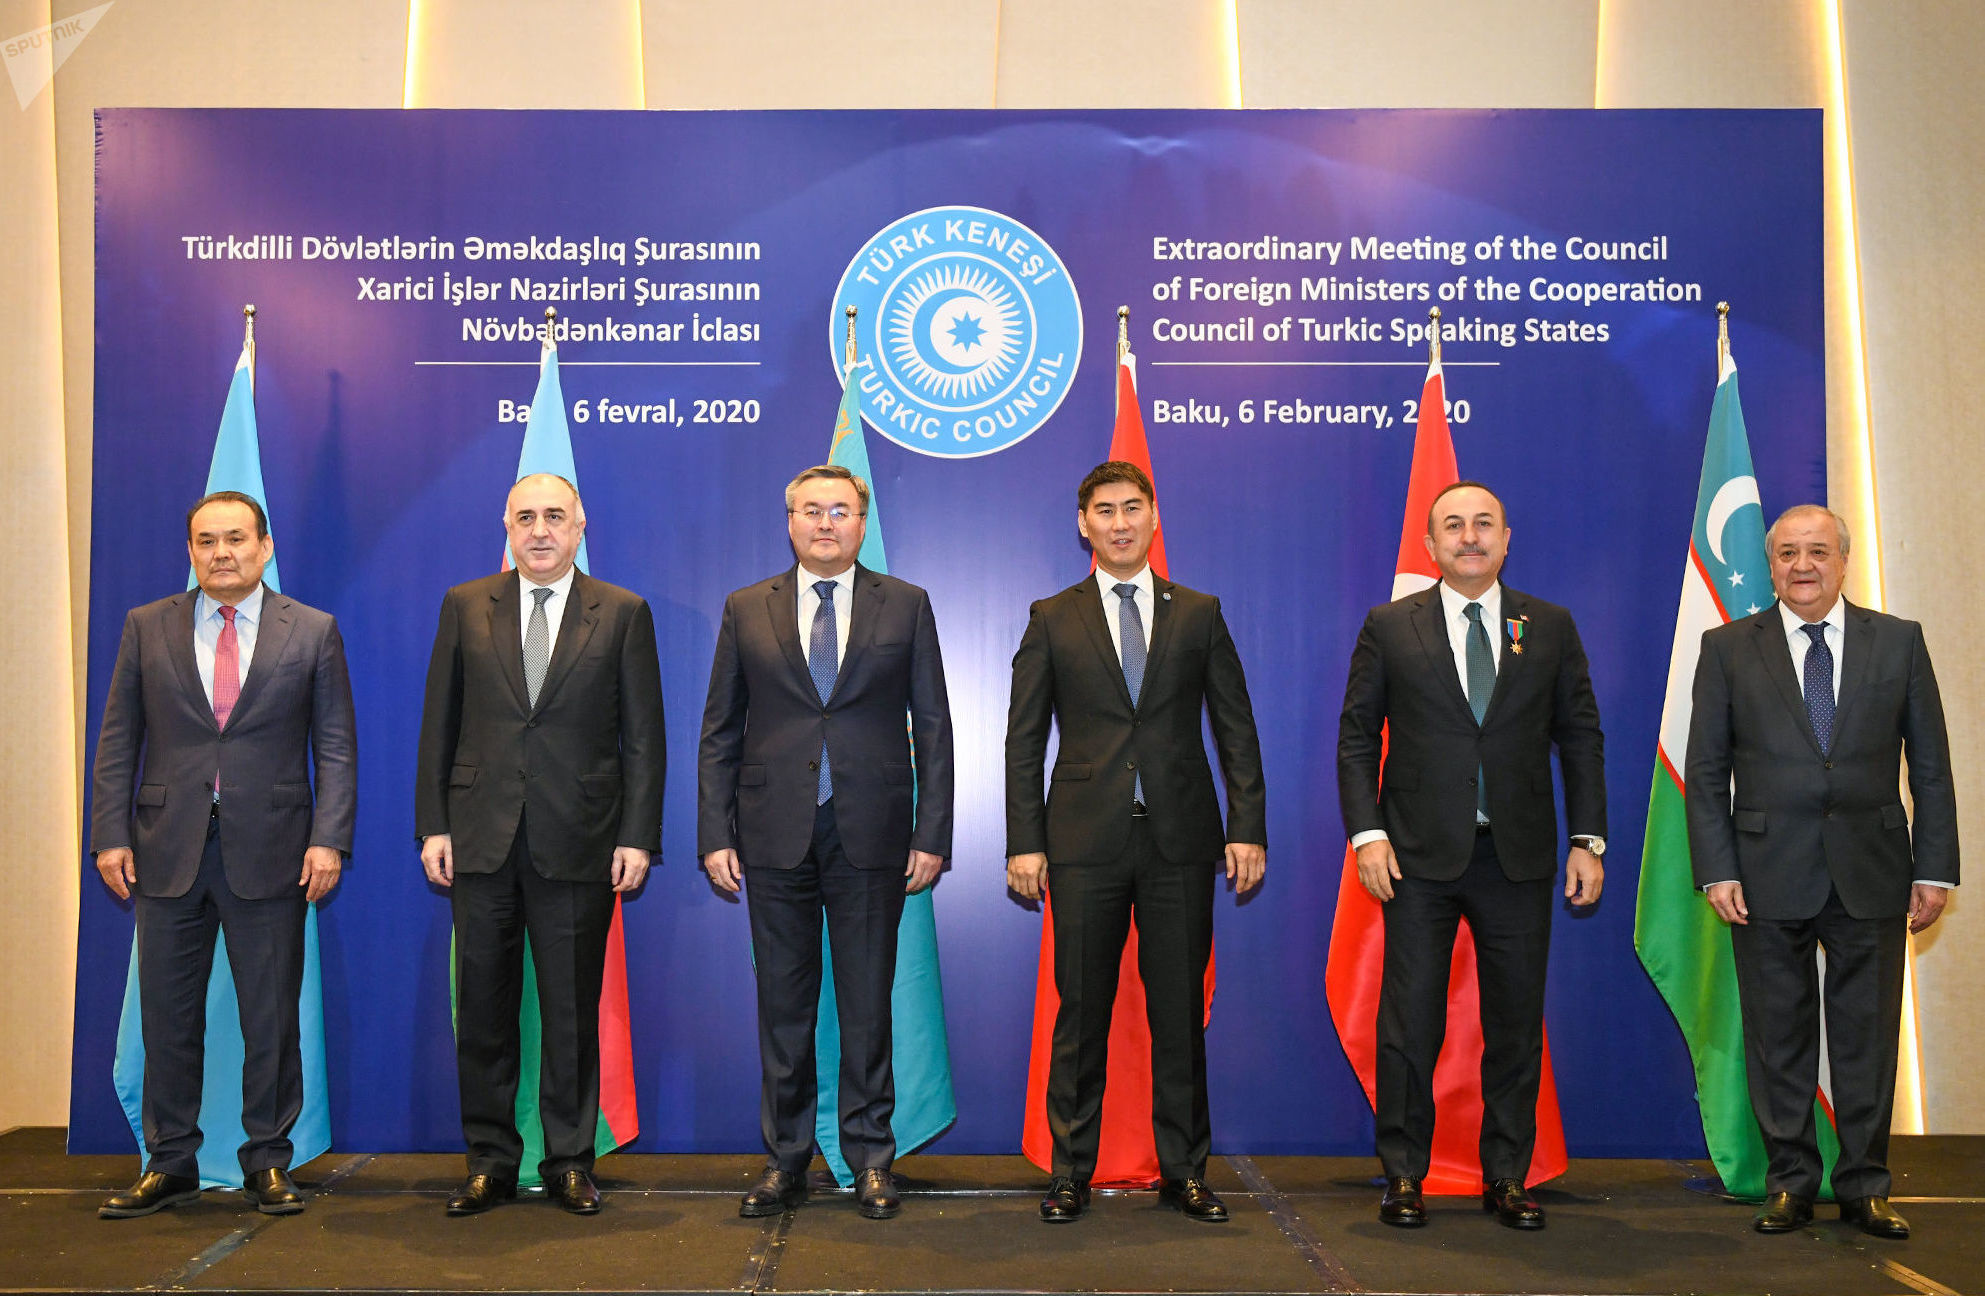 Turkic Council to be organized in Turkey in October 2020